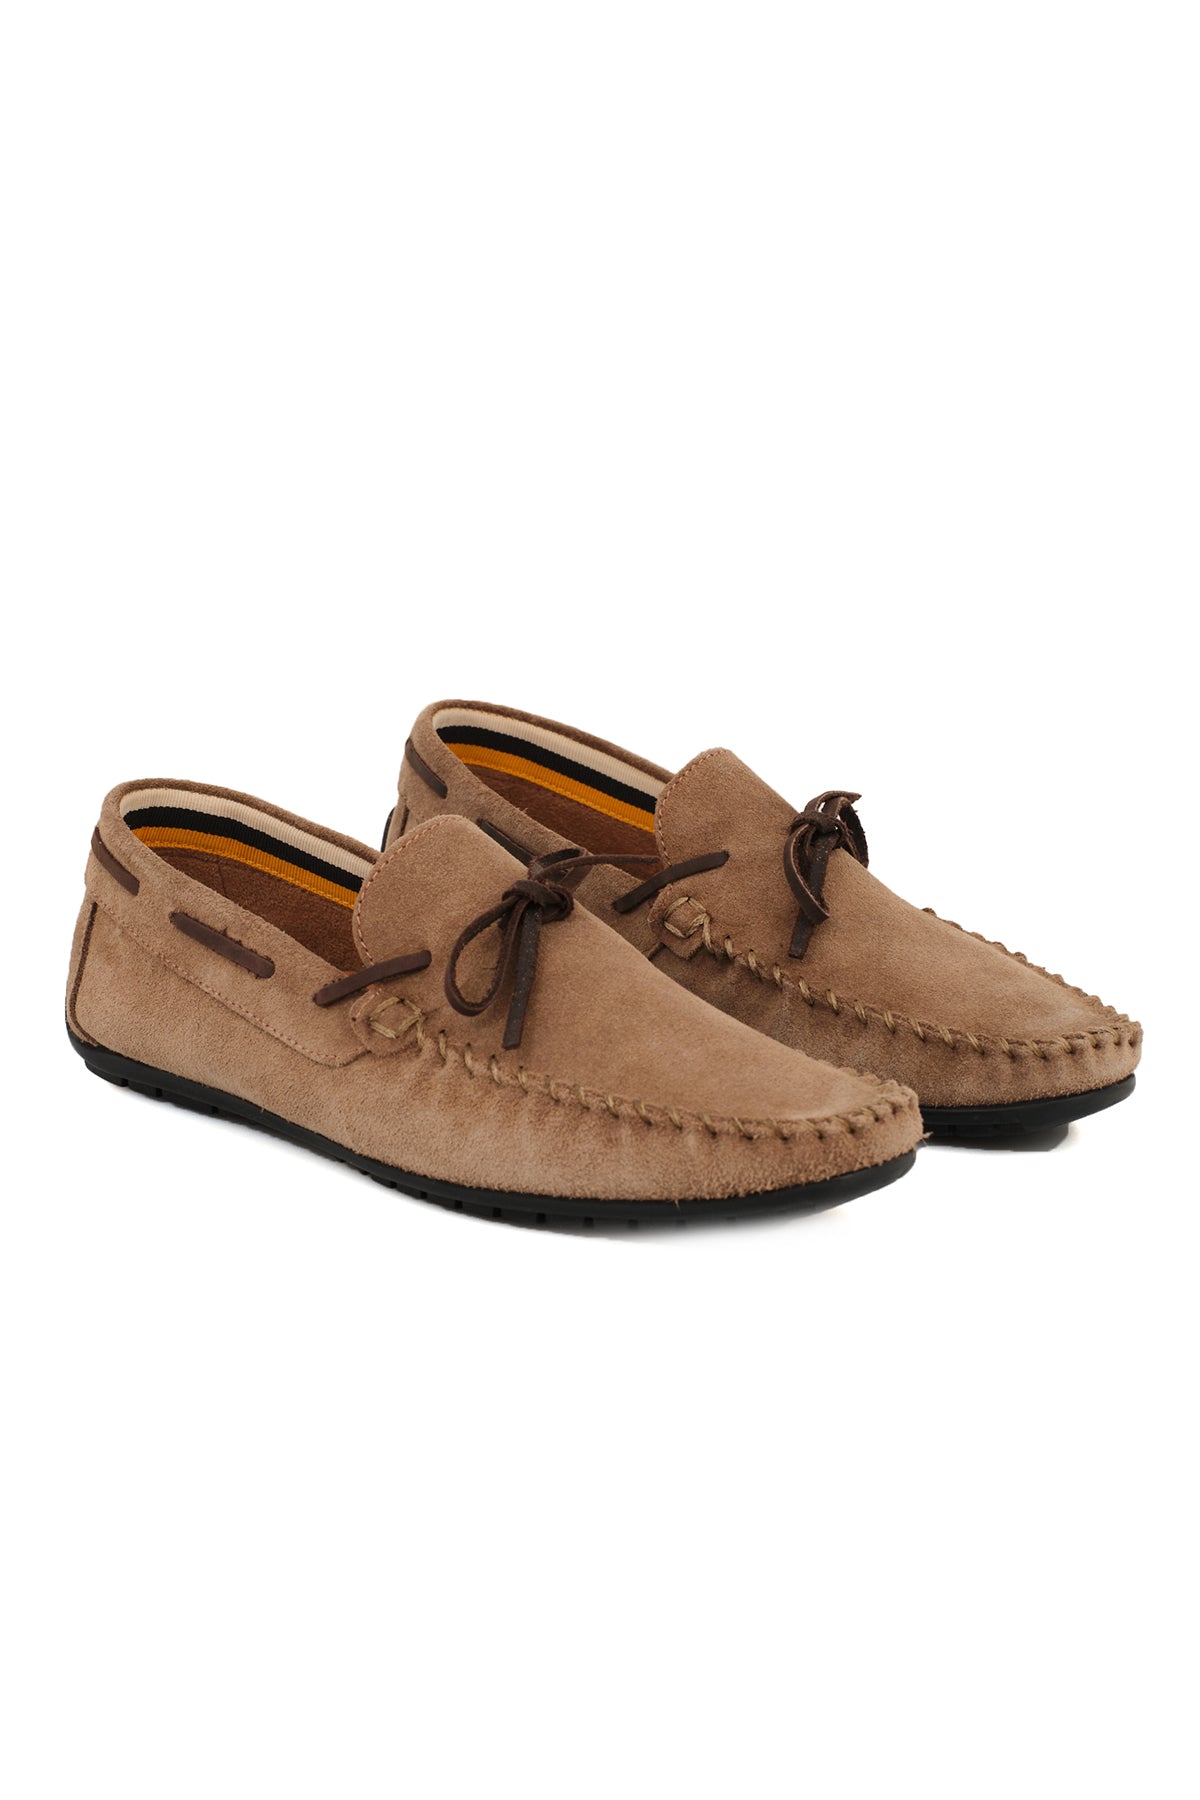 SUEDE CAR LOAFERS ΤΑΜΠΑ.